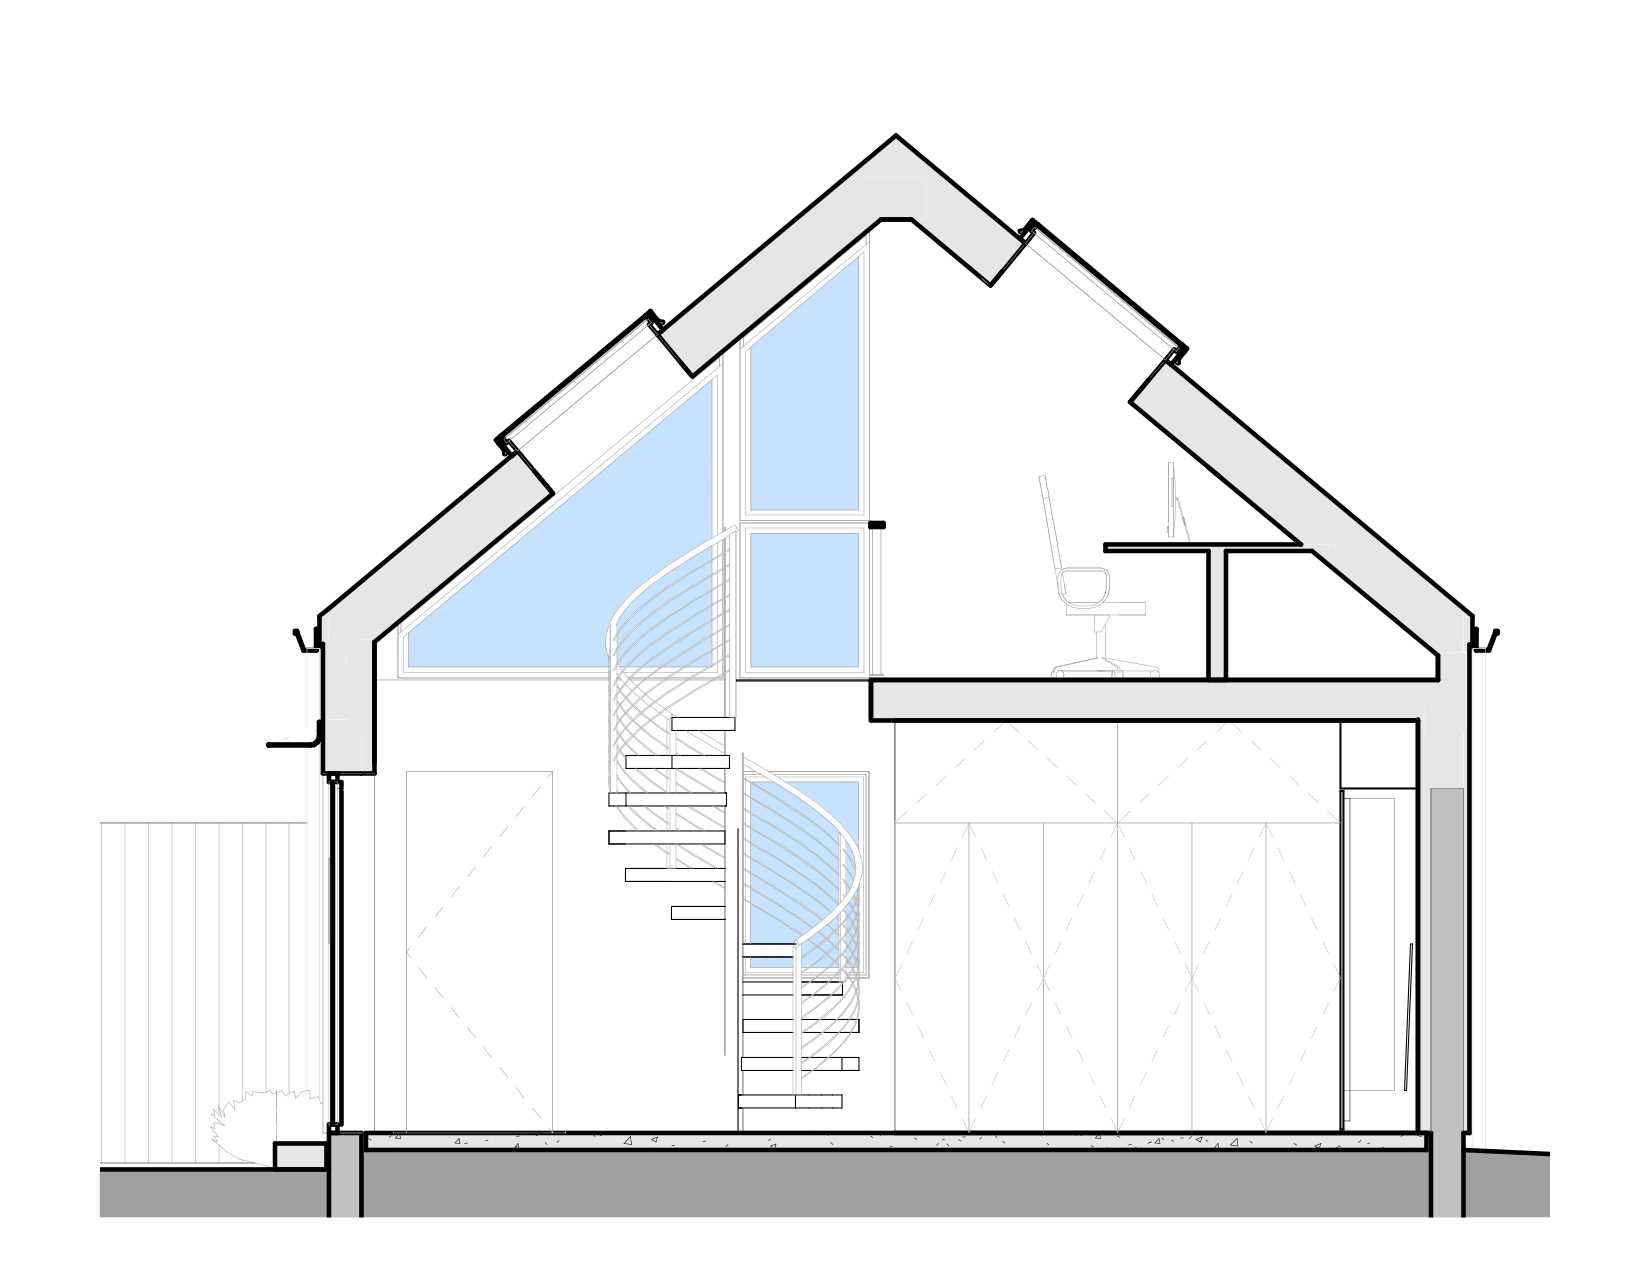 The architectural drawings for an ADU (accessory dwelling unit).